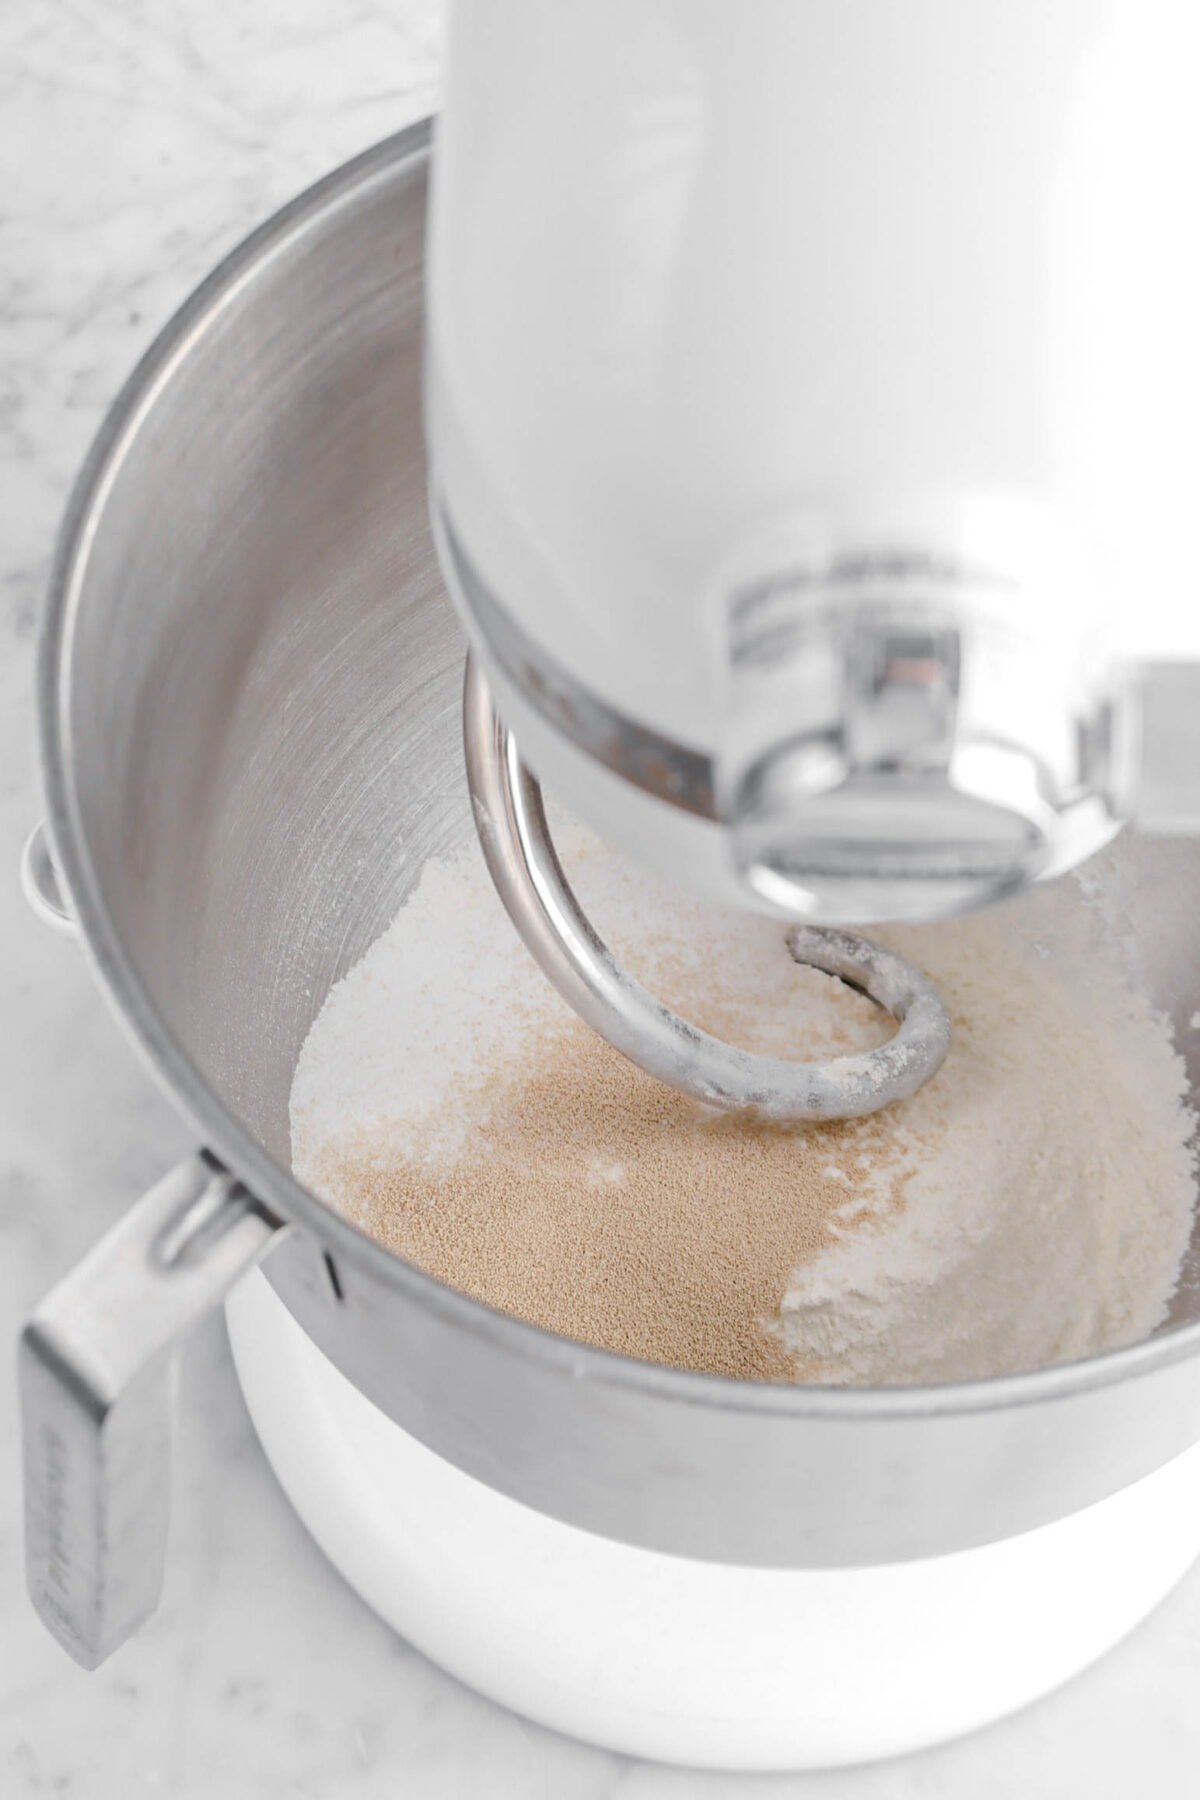 yeast, sugar, salt, and flour in mixer with dough hook.